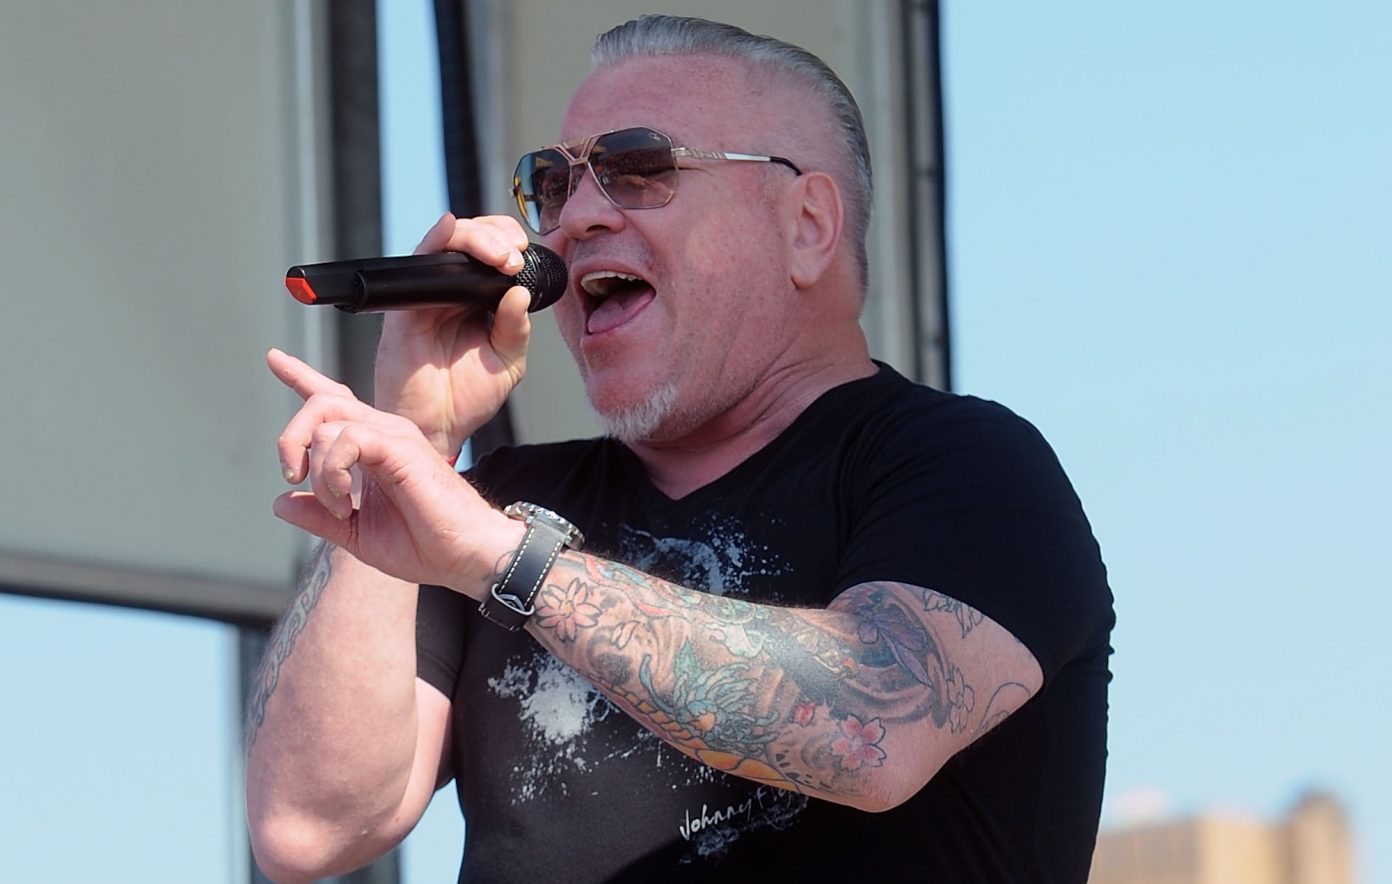 Smash Mouth Lead Singer Steve Harwell in Hospice Care, Battling Final Stage of Liver Failure